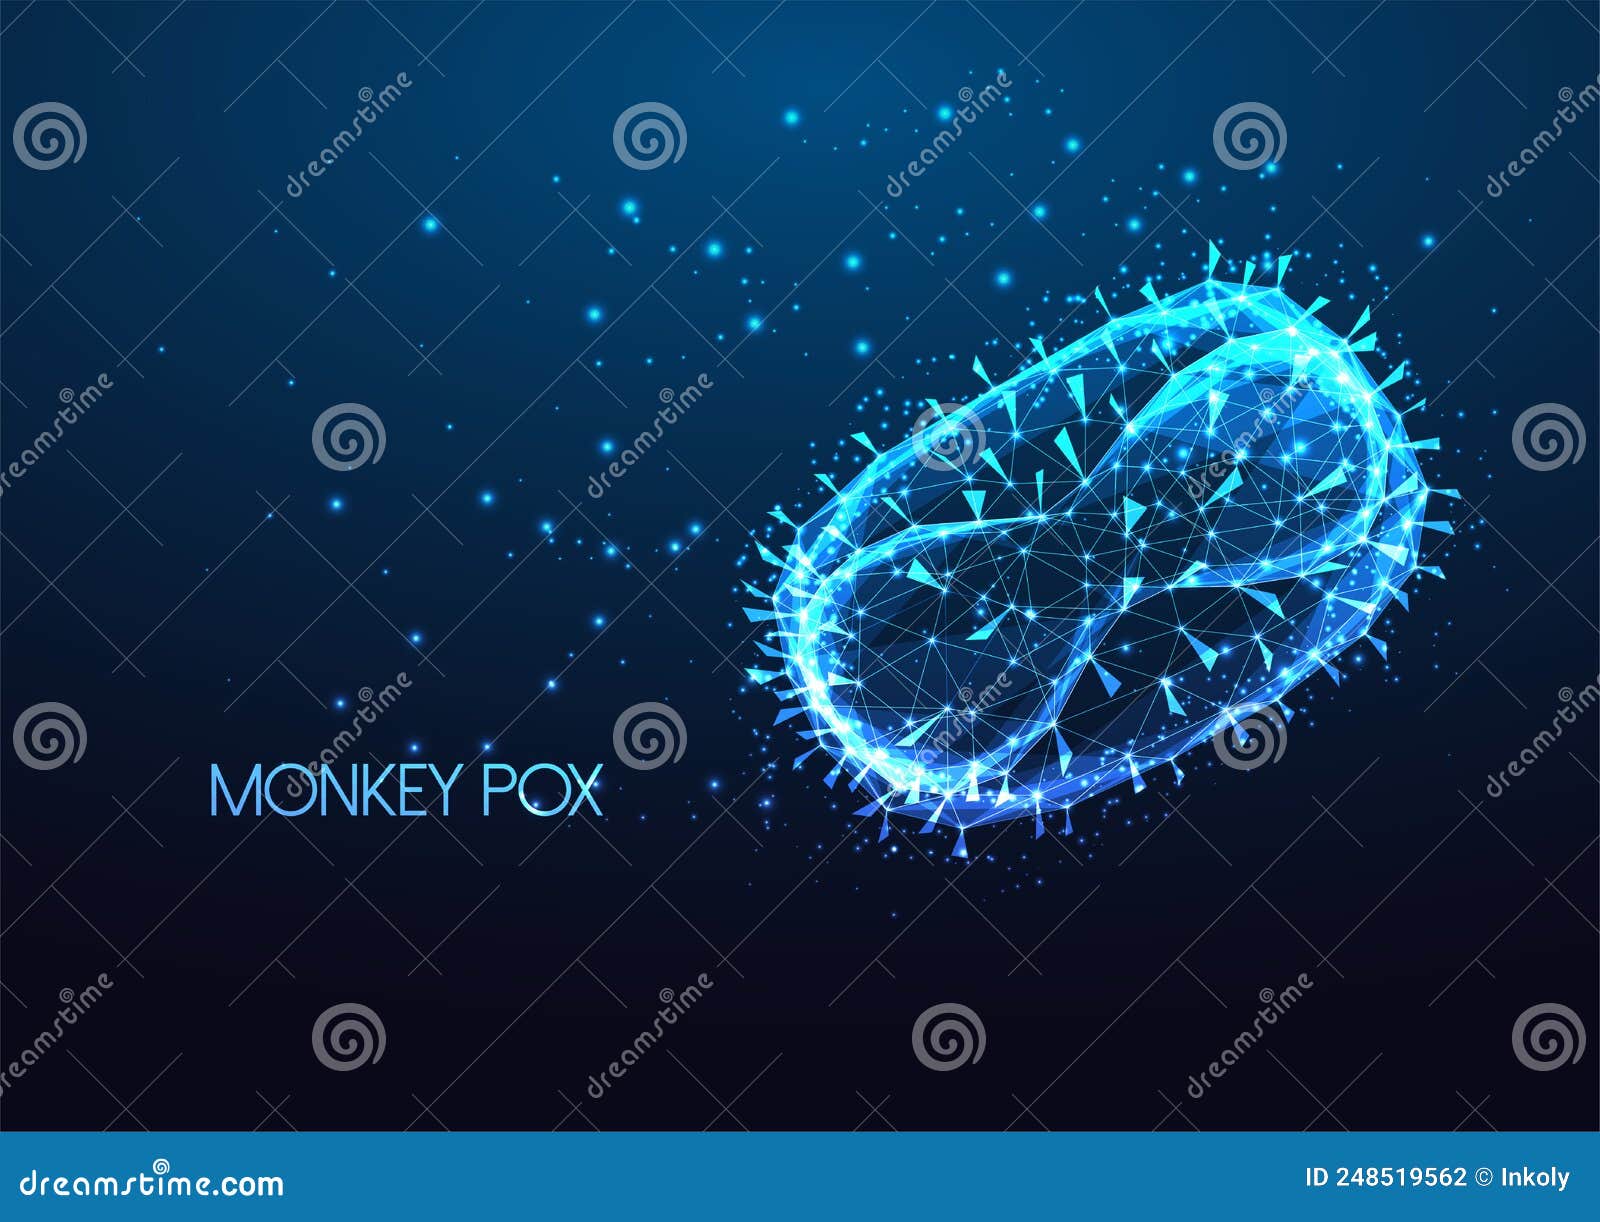 futuristic monkey pox virus infection concept with glowing low polygonal monkeypox virus cell